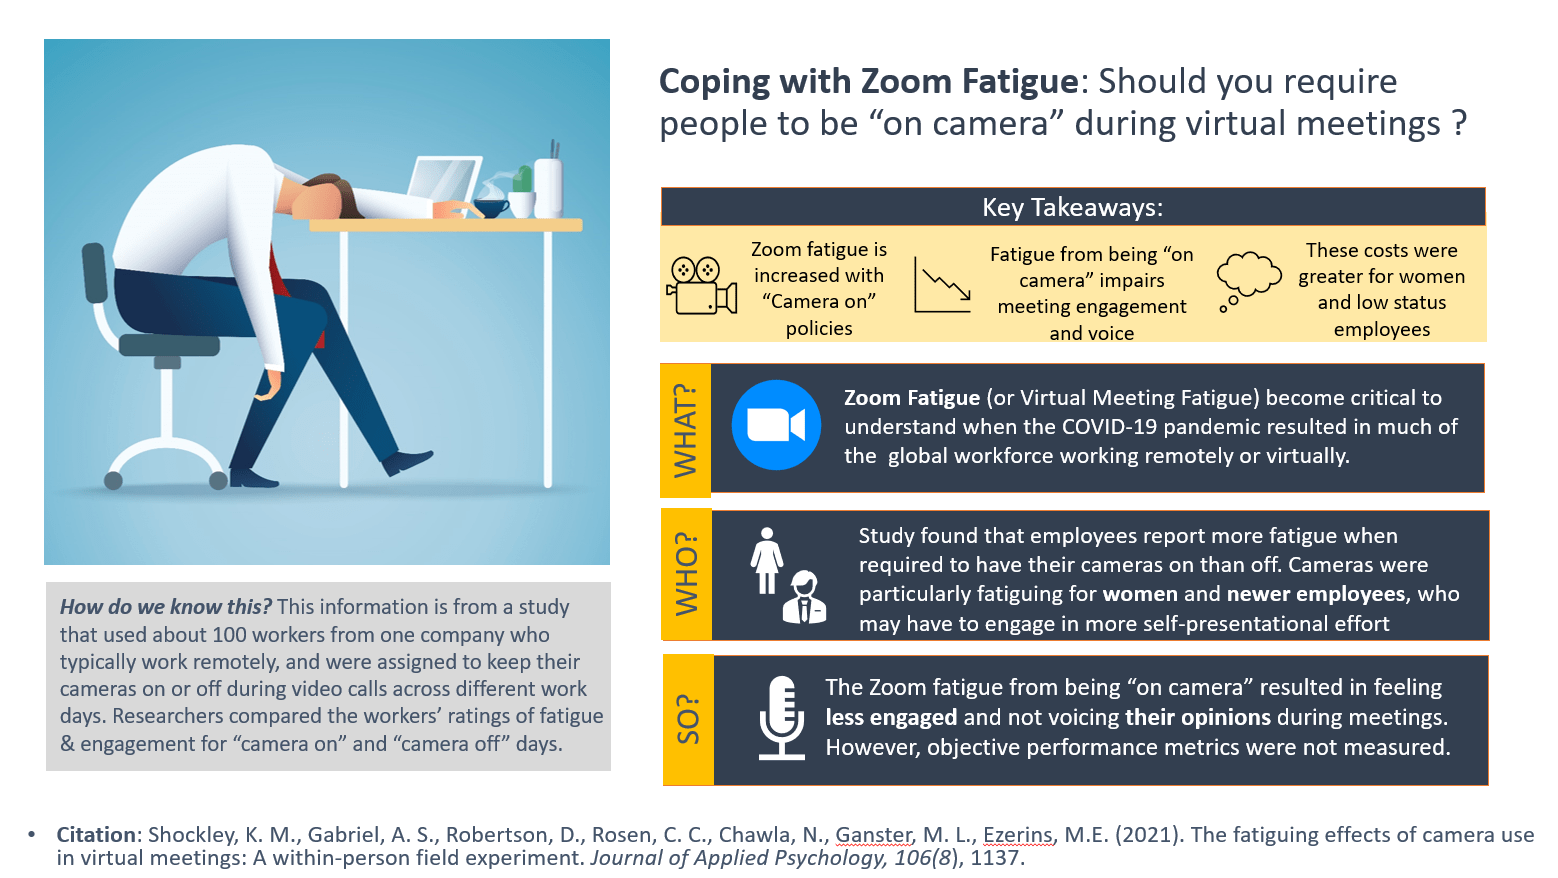 Should you require people to be on camera during virtual meetings? Zoom fatigue increases for women and low level employees. Those who are fatigued are less engaged, and  less likely to share their opinions. Performance objectives were not measured. 